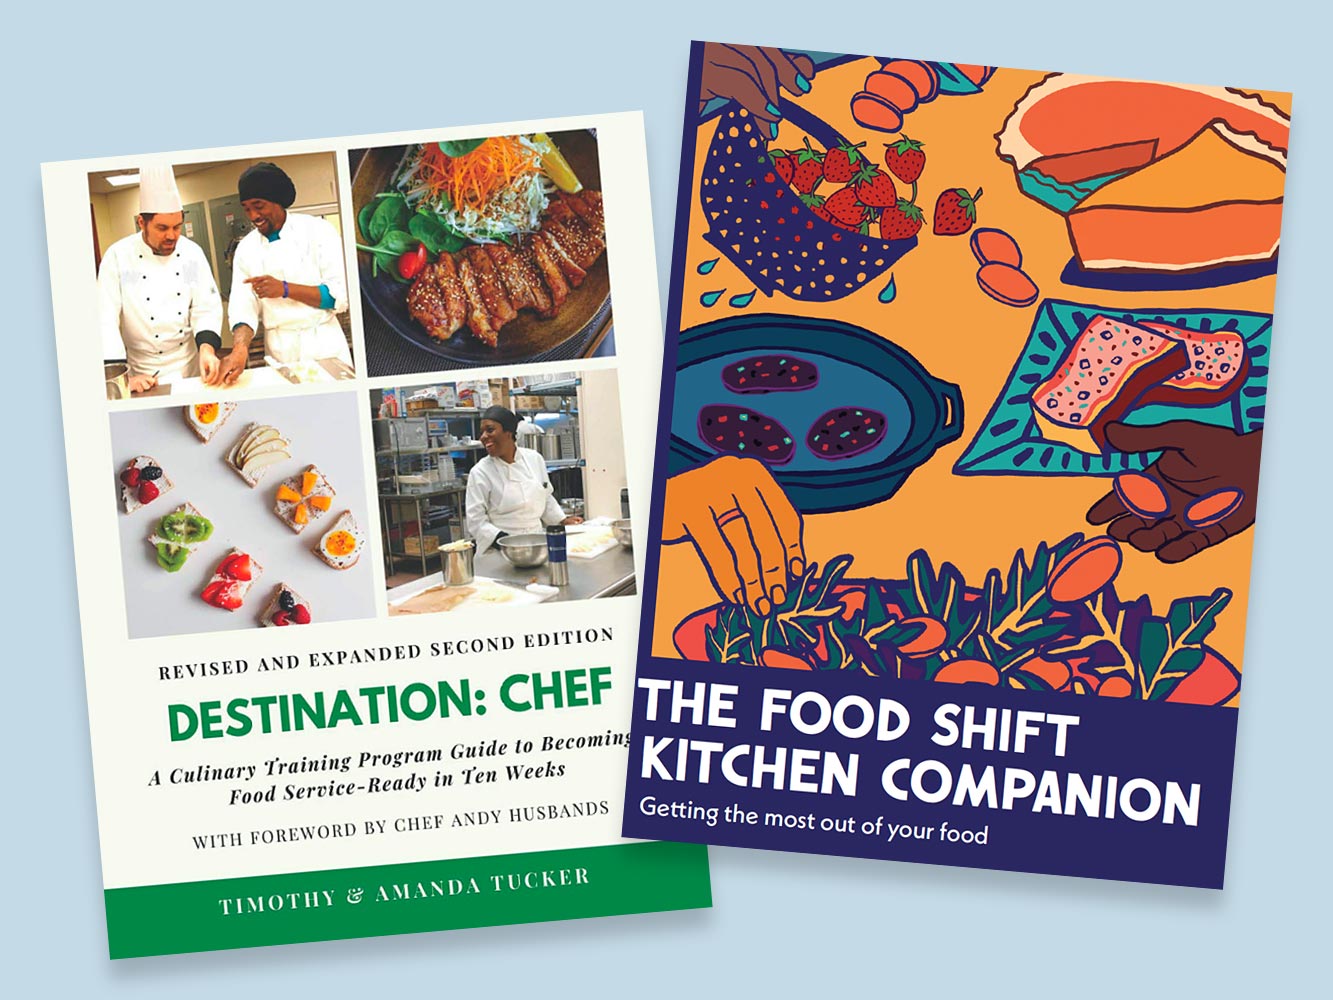 Book covers — Food Shift Kitchen Companion: Getting the Most Out of Your Food and Destination: Chef - A Culinary Training Program Guide to Becoming Food-Service Ready in Ten Weeks